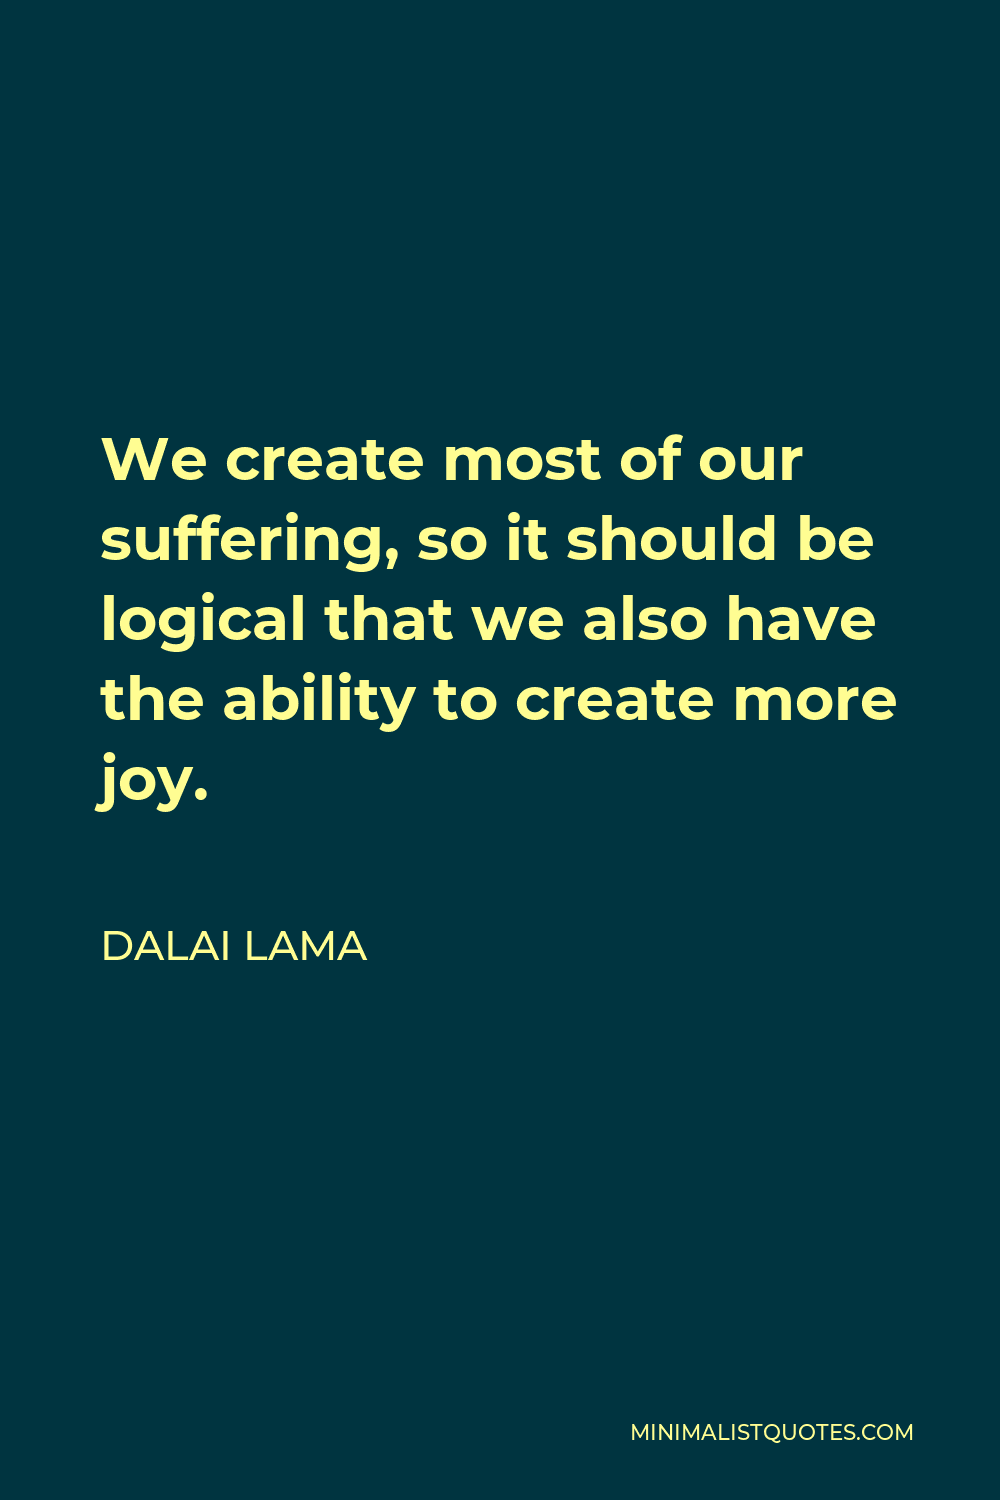 Dalai Lama Quote - We create most of our suffering, so it should be logical that we also have the ability to create more joy.